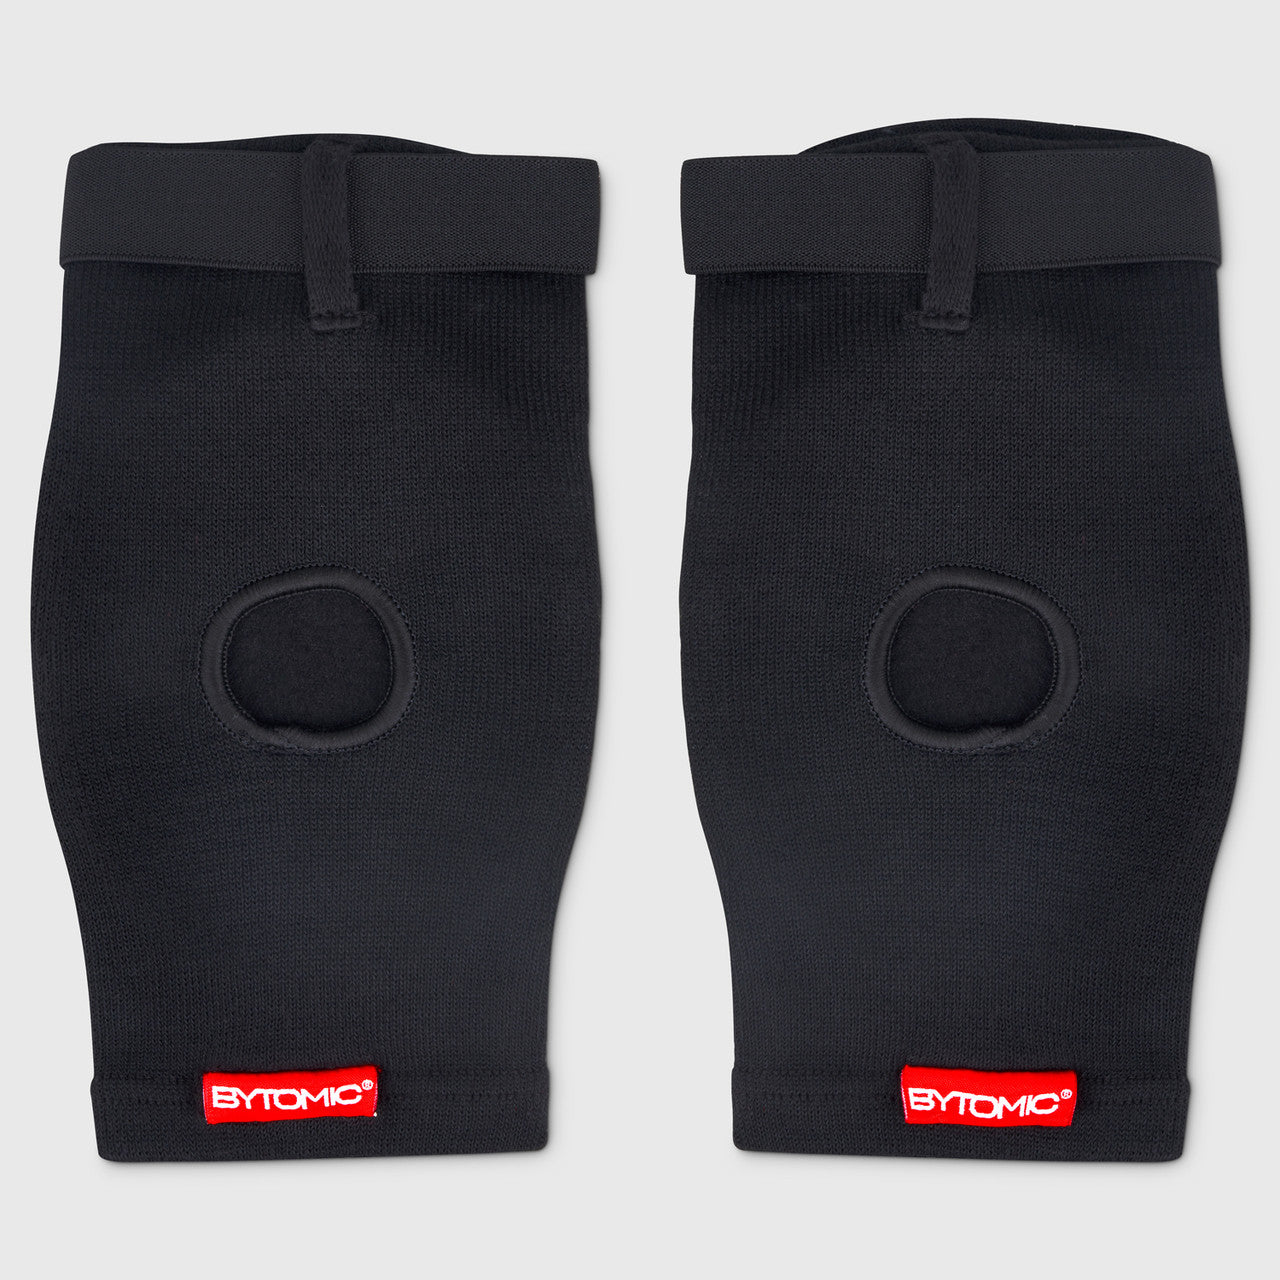 Bytomic Red Label Elasticated Elbow Guard - Black/White Bytomic